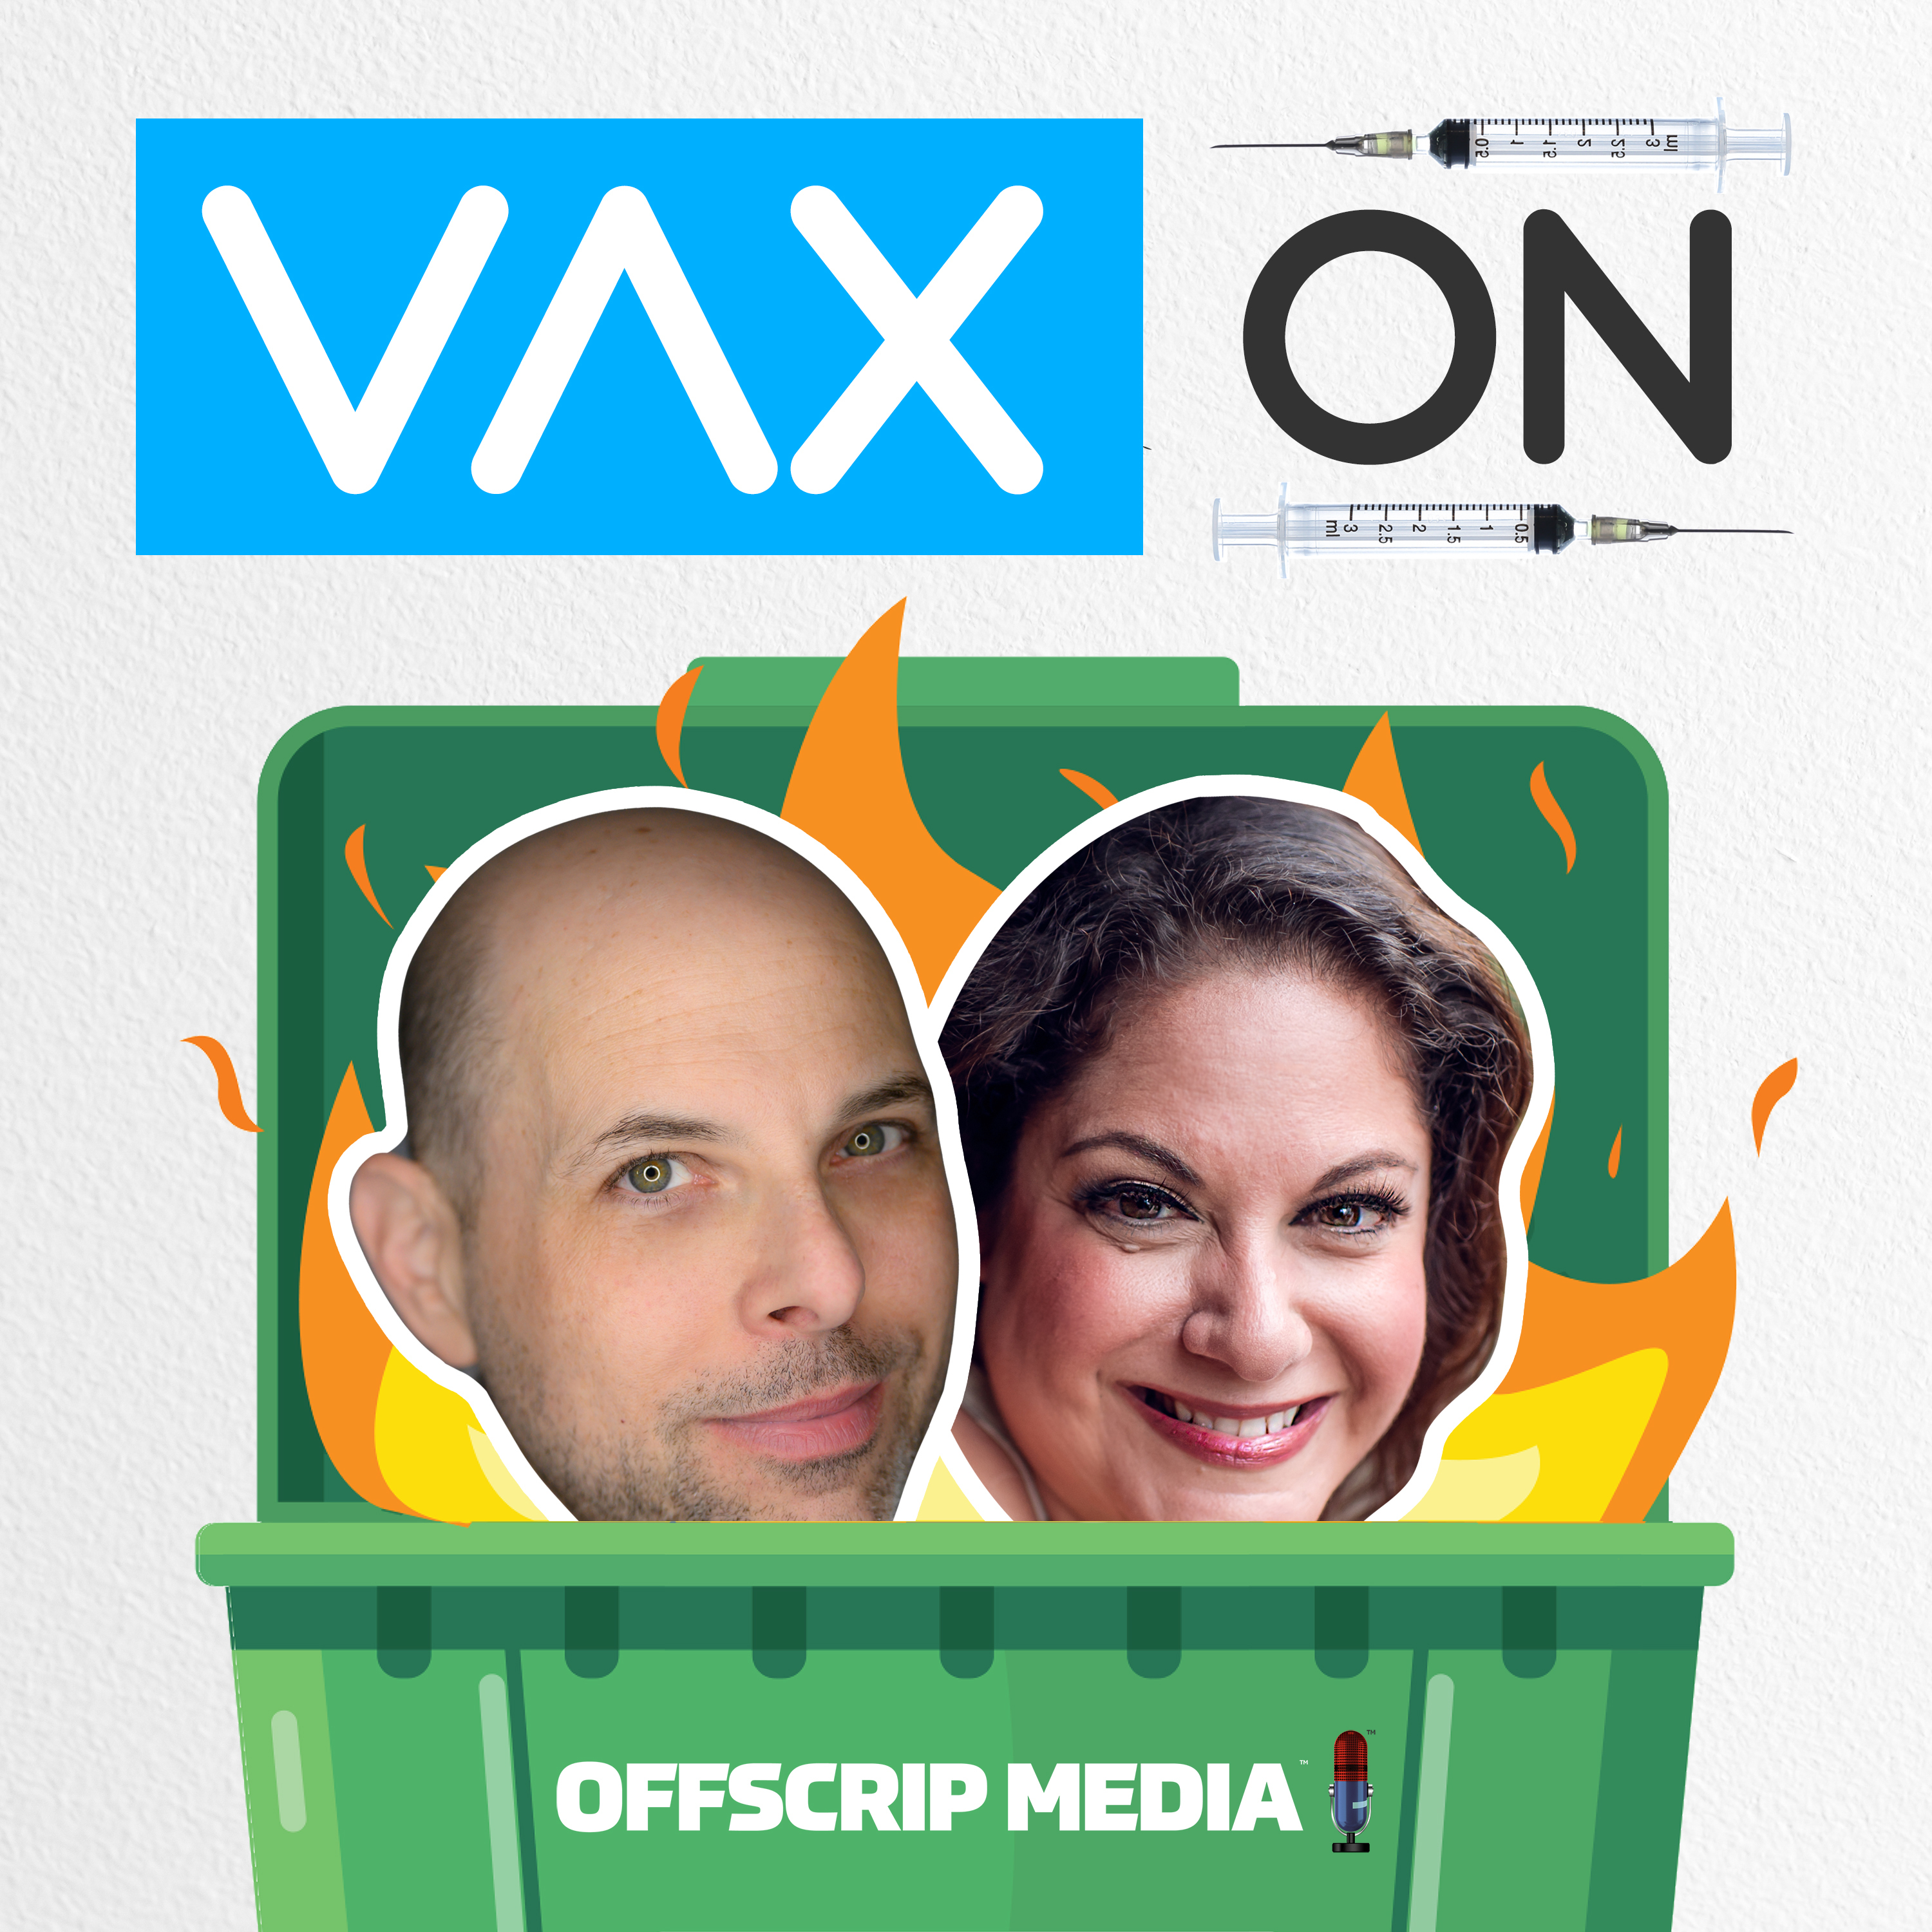 VAX ON: Summer Camp Sadness, Phony Vaccines, and 